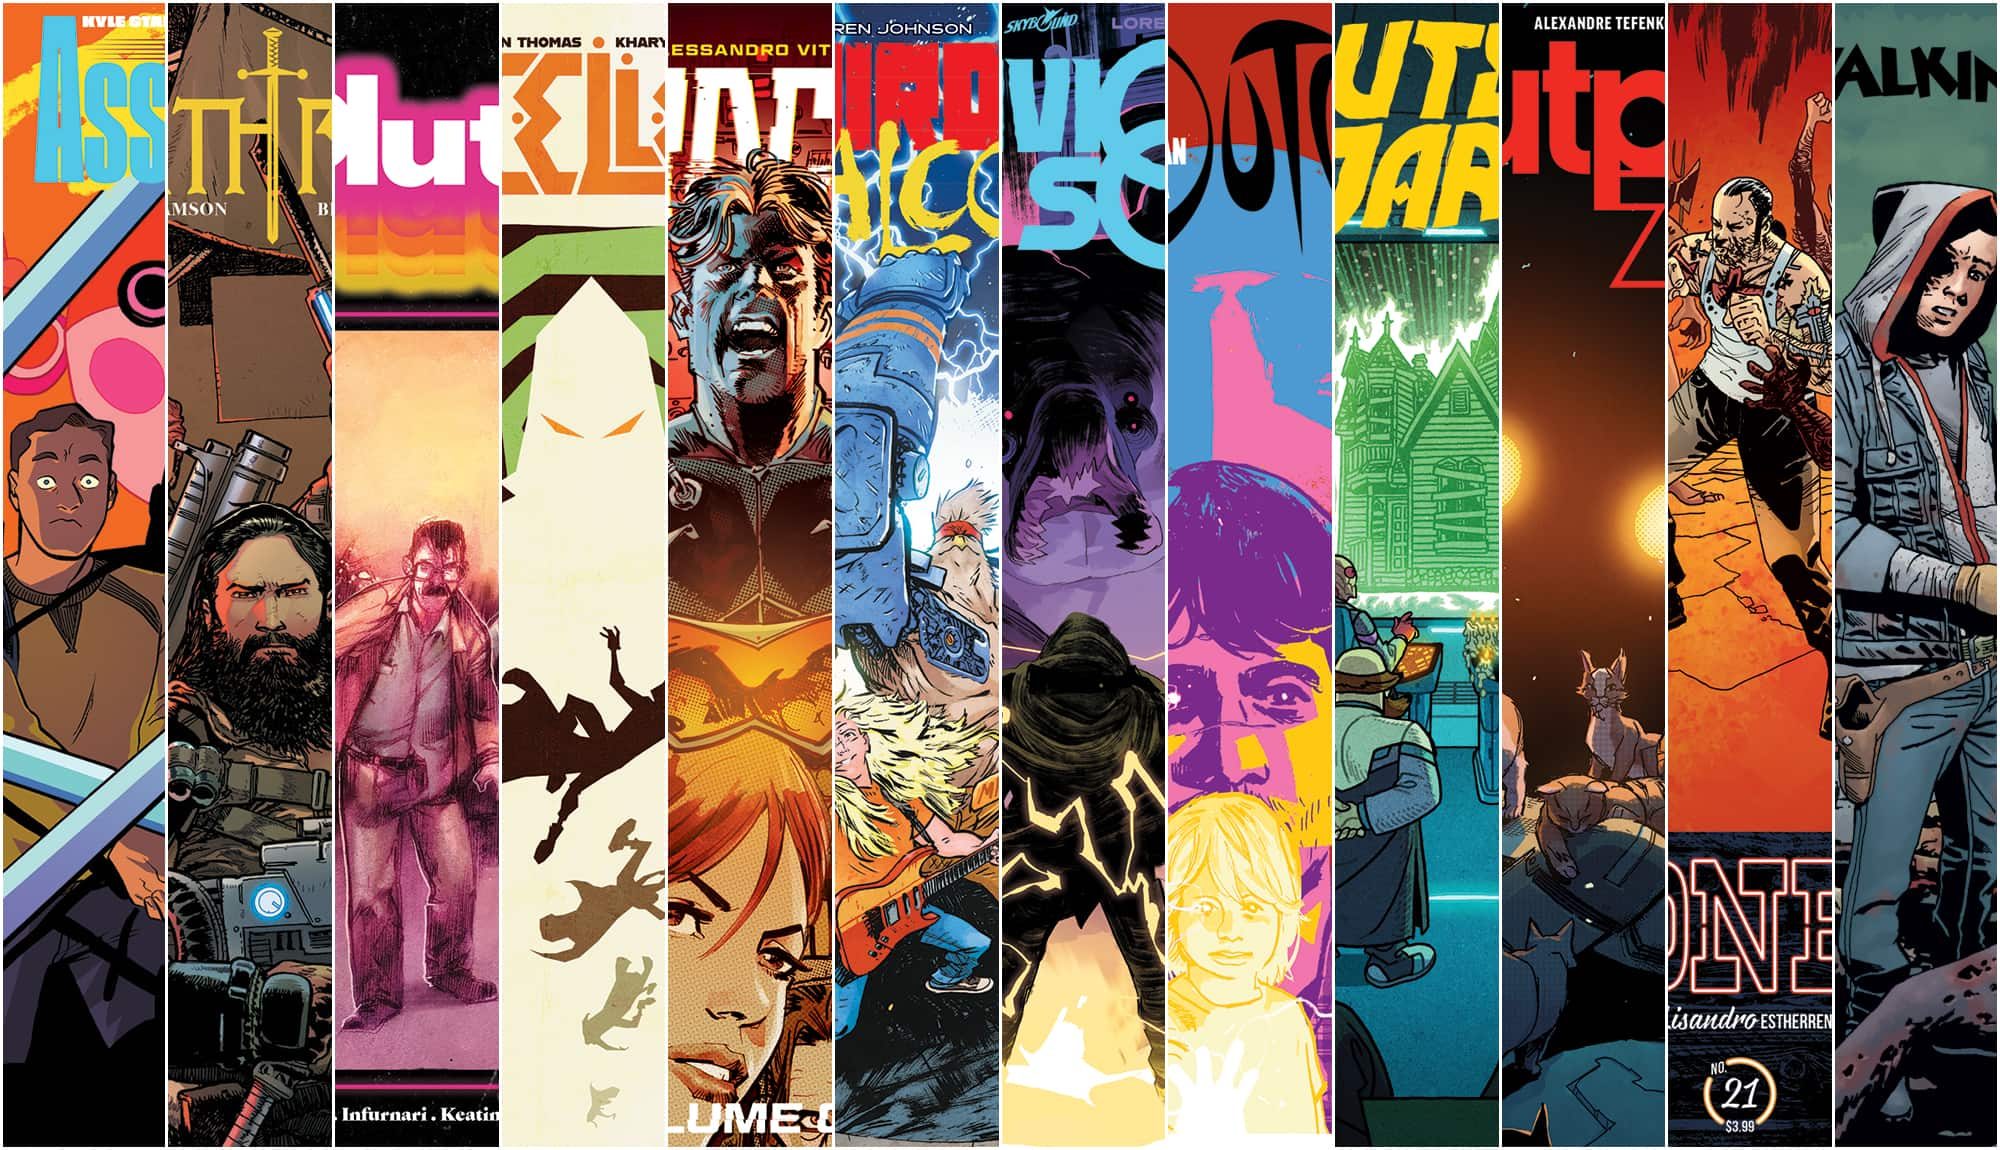 June 2019 Skybound Solicits! Books Announced!